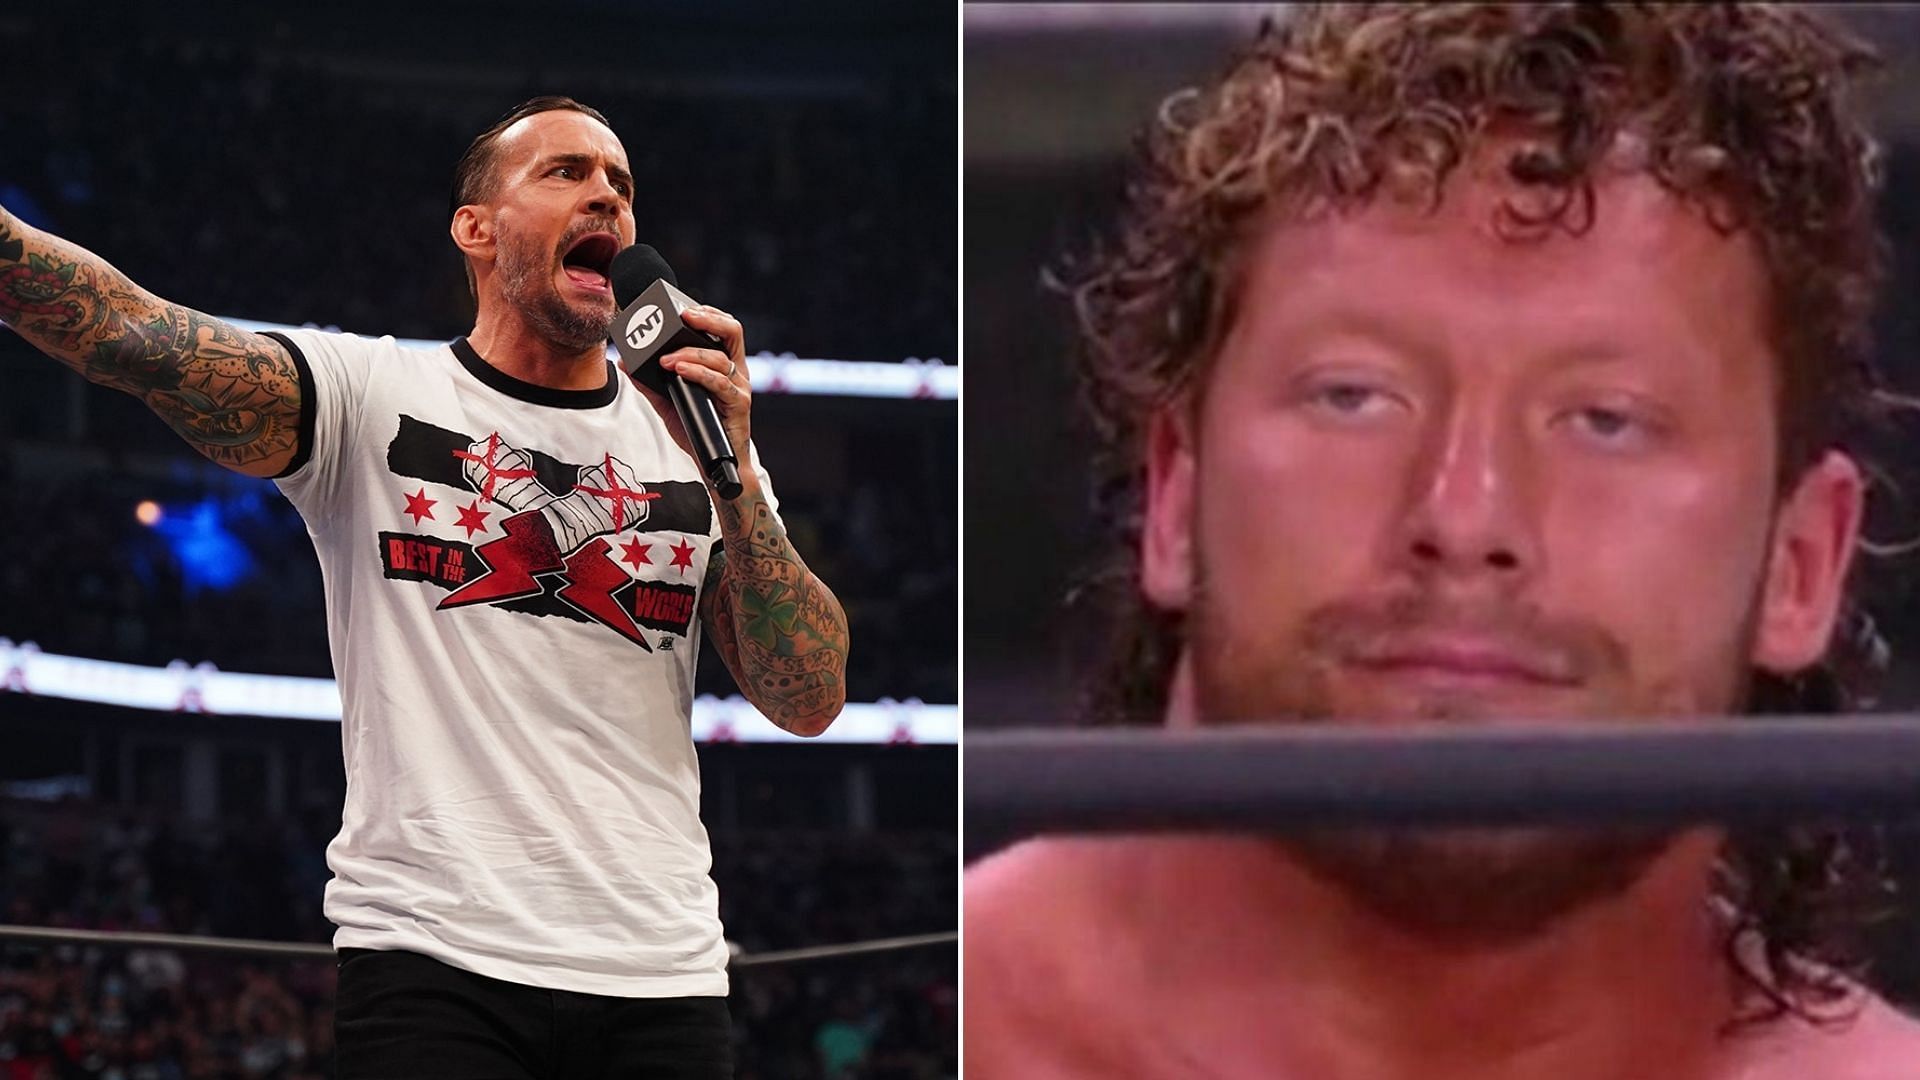 Kenny Omega and CM Punk have had their share of Twitter spats